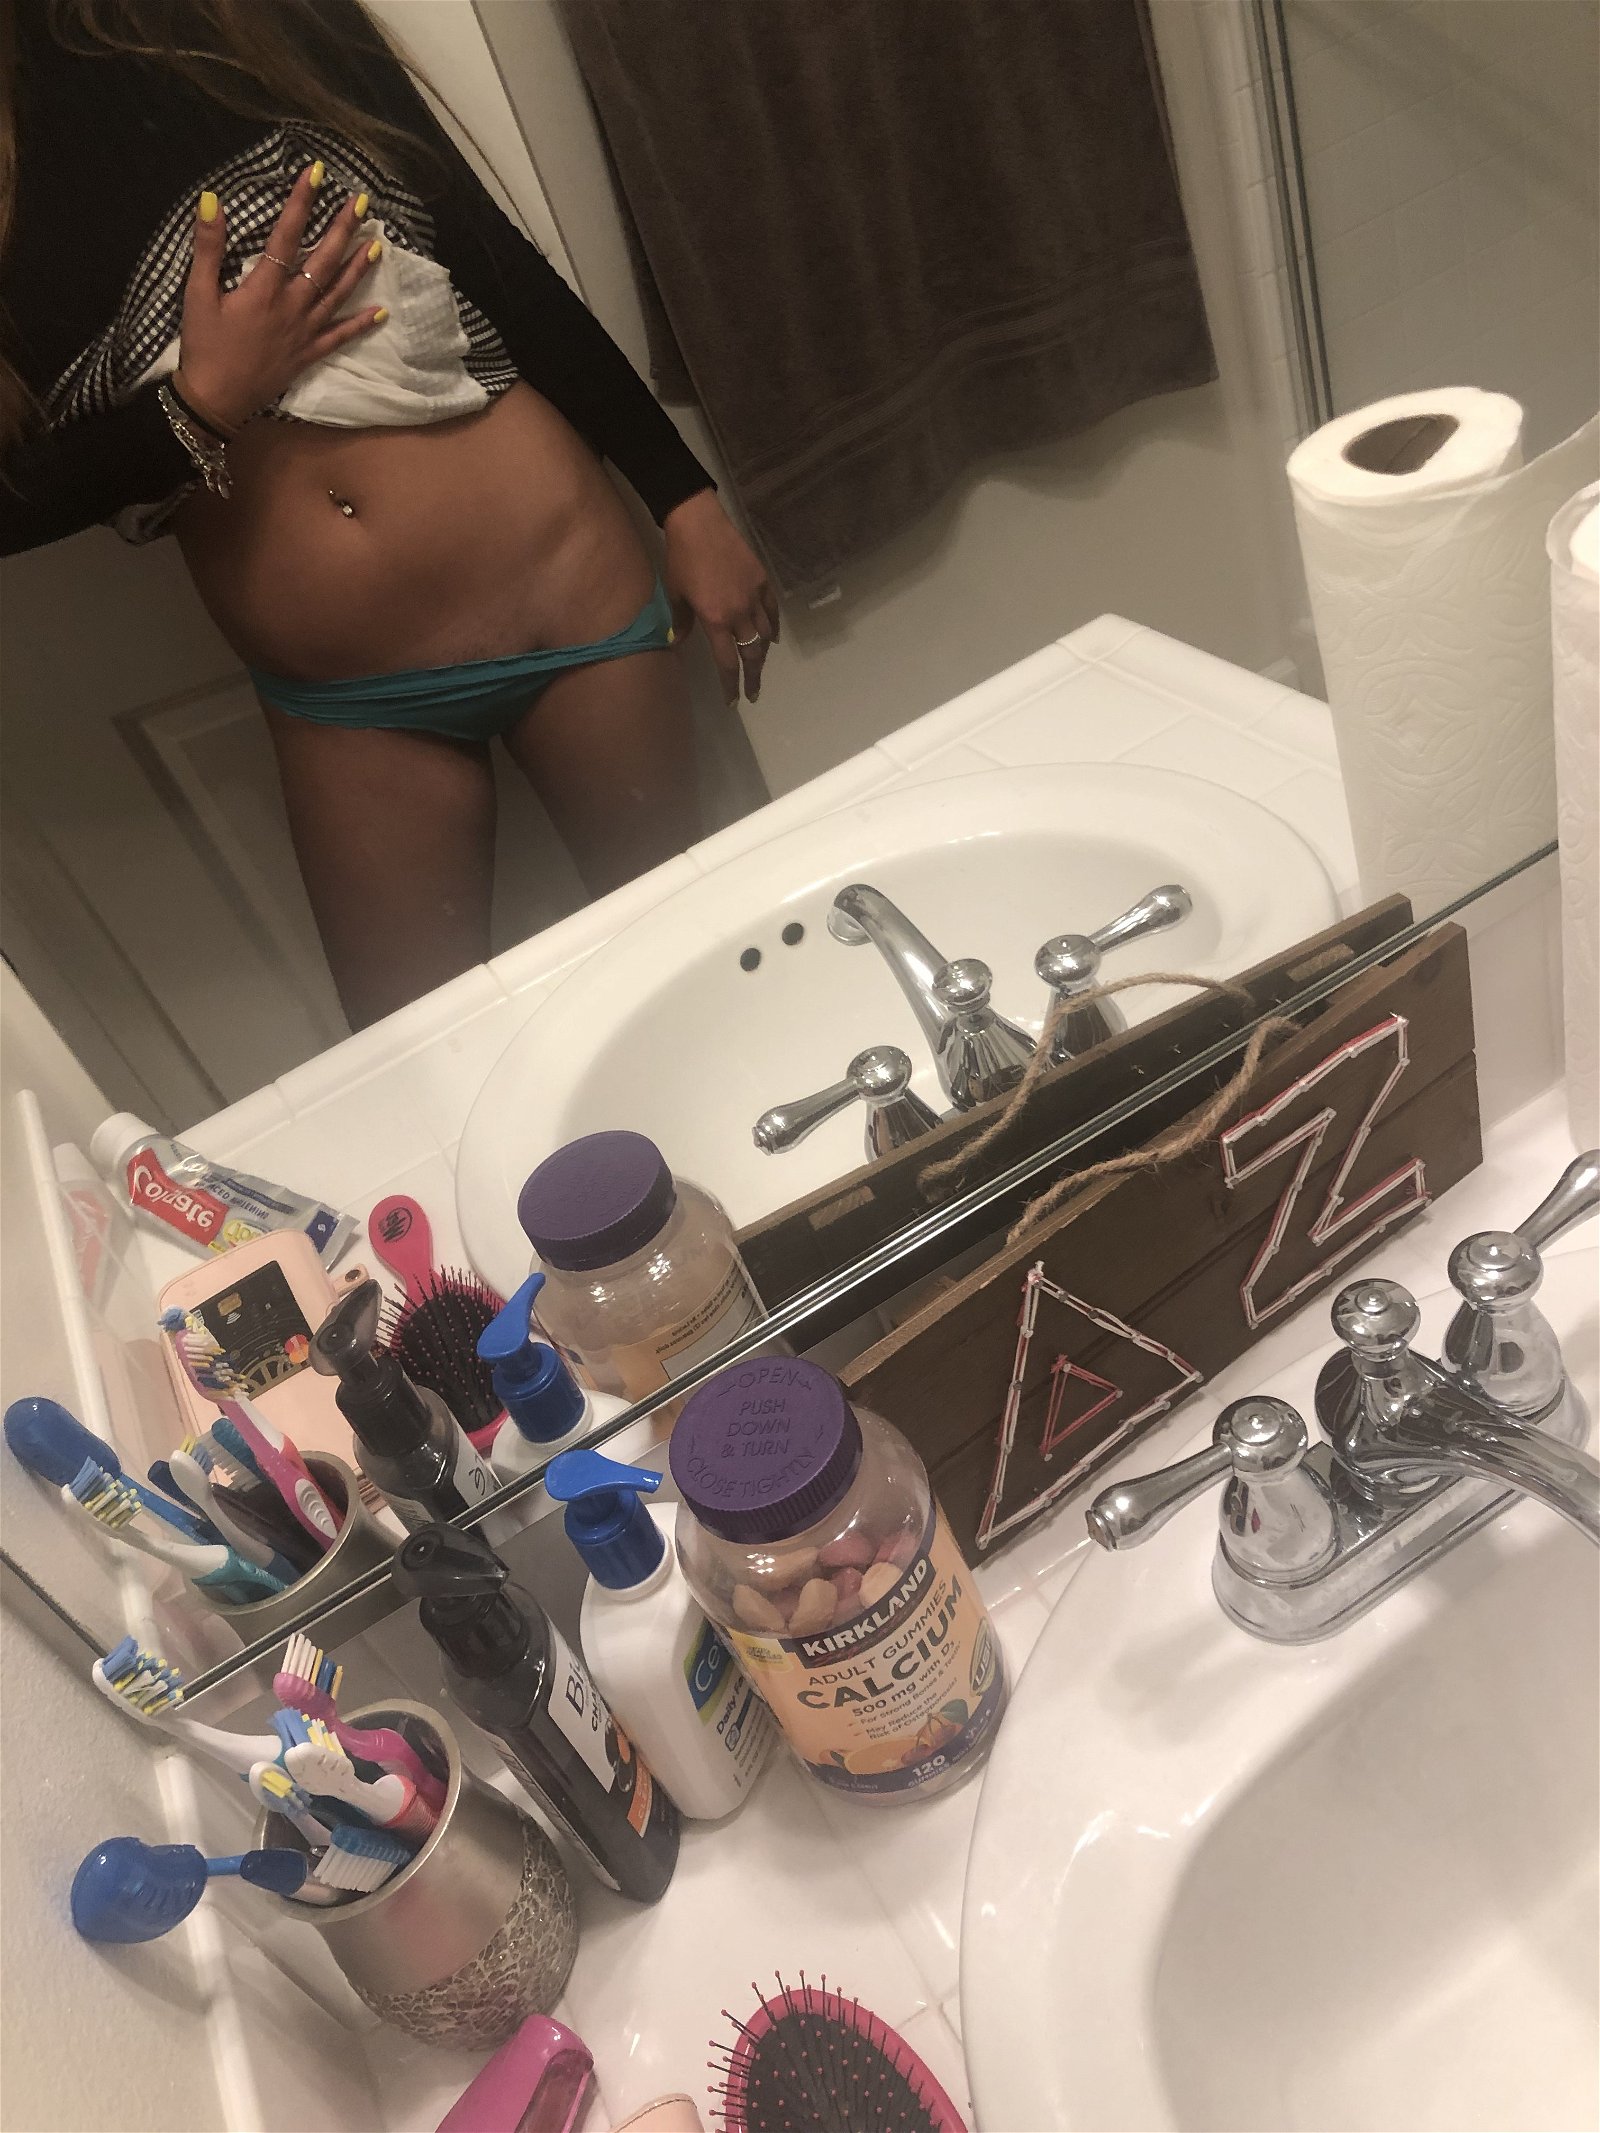 Photo by Nilegoddess with the username @Nilegoddess, who is a star user,  April 8, 2019 at 3:27 AM